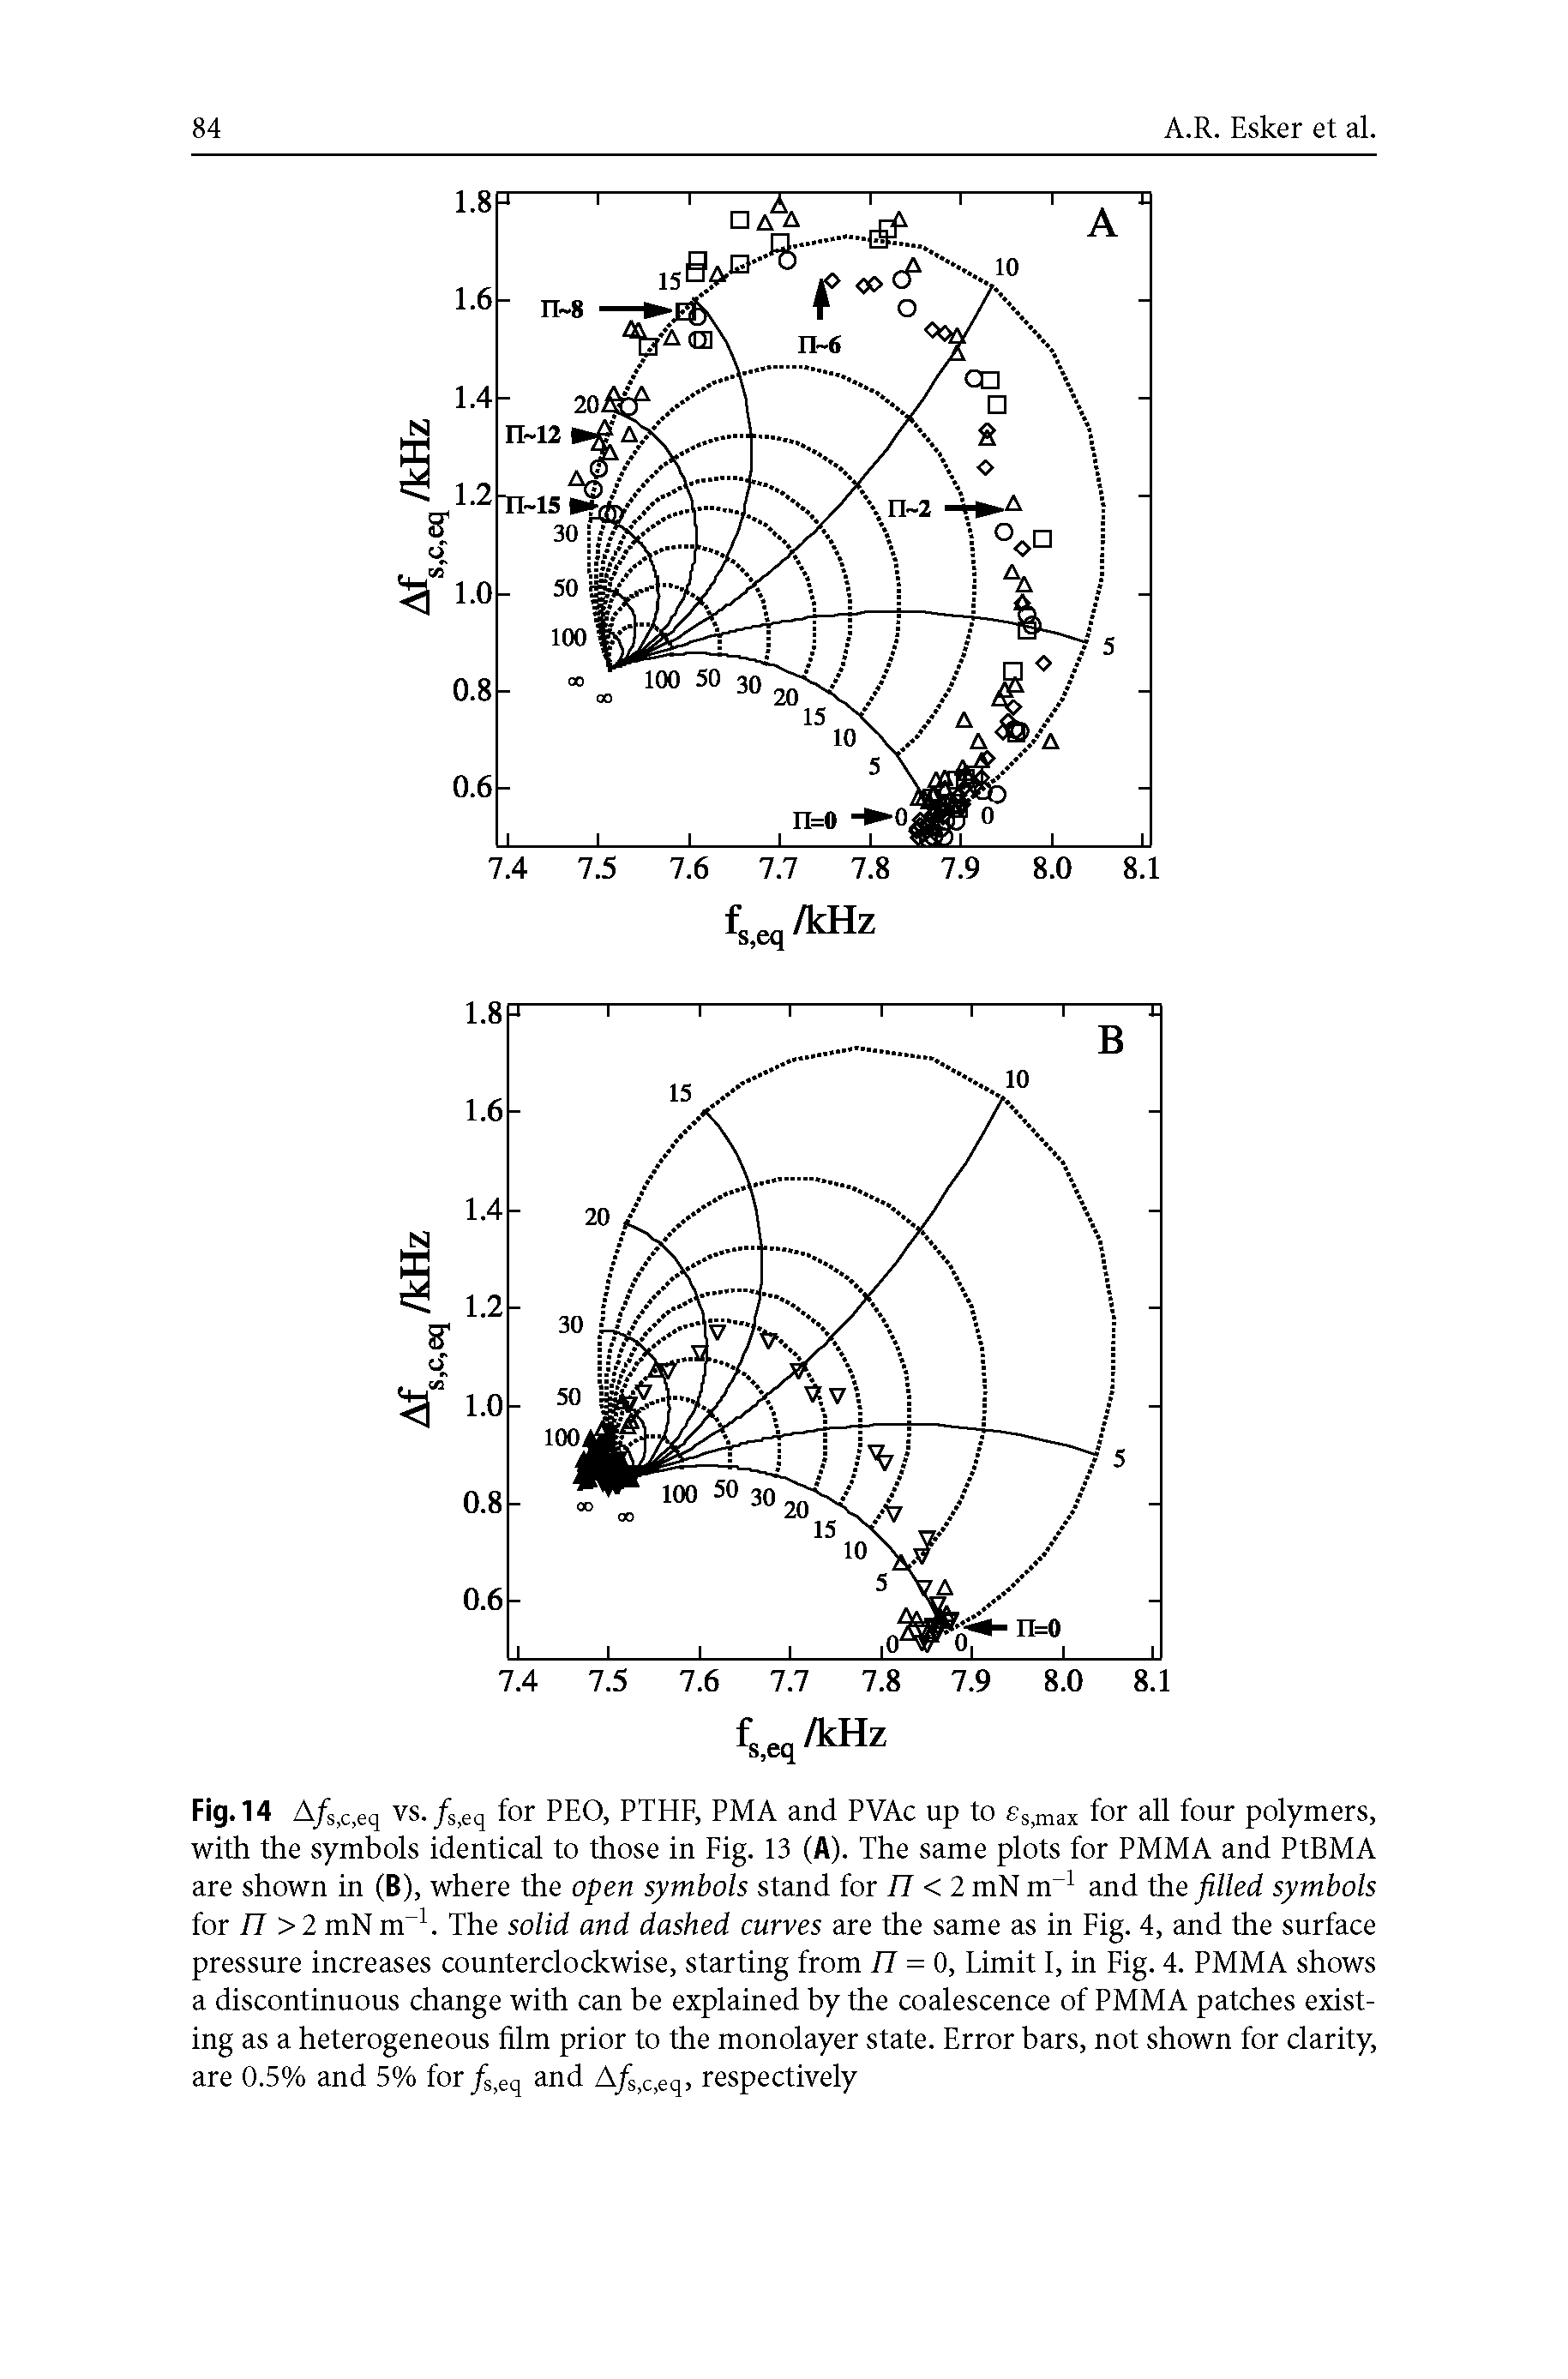 Fig. 14 A/SjC>eq vs. /s>eq for PEO, PTFiF, PMA and PVAc up to es>max for all four polymers, with the symbols identical to those in Fig. 13 (A). The same plots for PMMA and PtBMA are shown in (B), where the open symbols stand for 17 < 2 mN nr1 and the filled symbols for n > 2 mN nr1. The solid and dashed curves are the same as in Fig. 4, and the surface pressure increases counterclockwise, starting from 77 = 0, Limit I, in Fig. 4. PMMA shows a discontinuous change with can be explained by the coalescence of PMMA patches existing as a heterogeneous film prior to the monolayer state. Error bars, not shown for clarity, are 0.5% and 5% for/s>eq and A/SjC>eq, respectively...